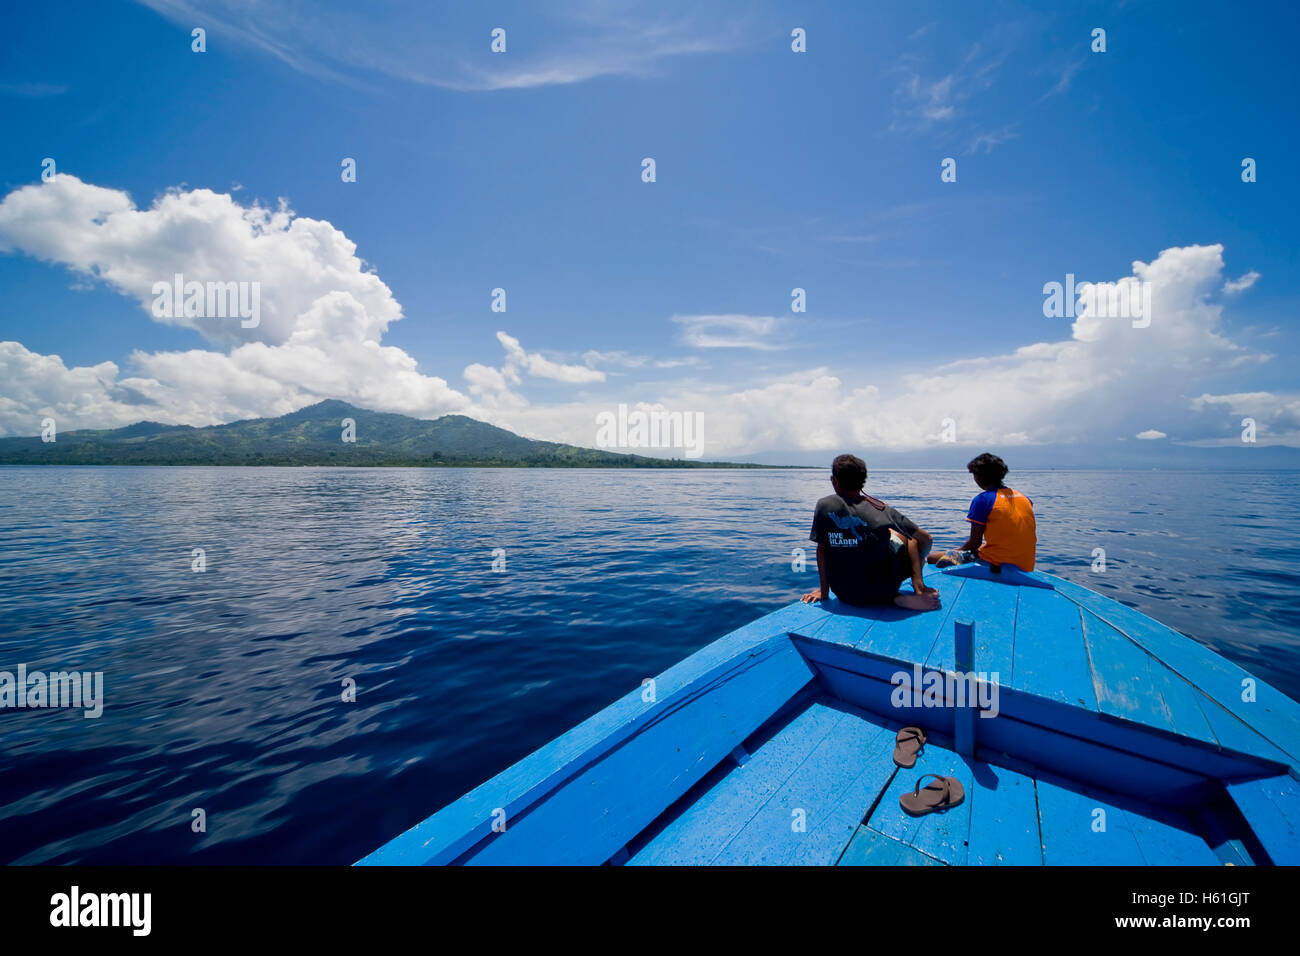 Young couple sitting at the bow of a wooden boat, Siladen island, Sulawesi, Indonesia, Southeast Asia Stock Photo